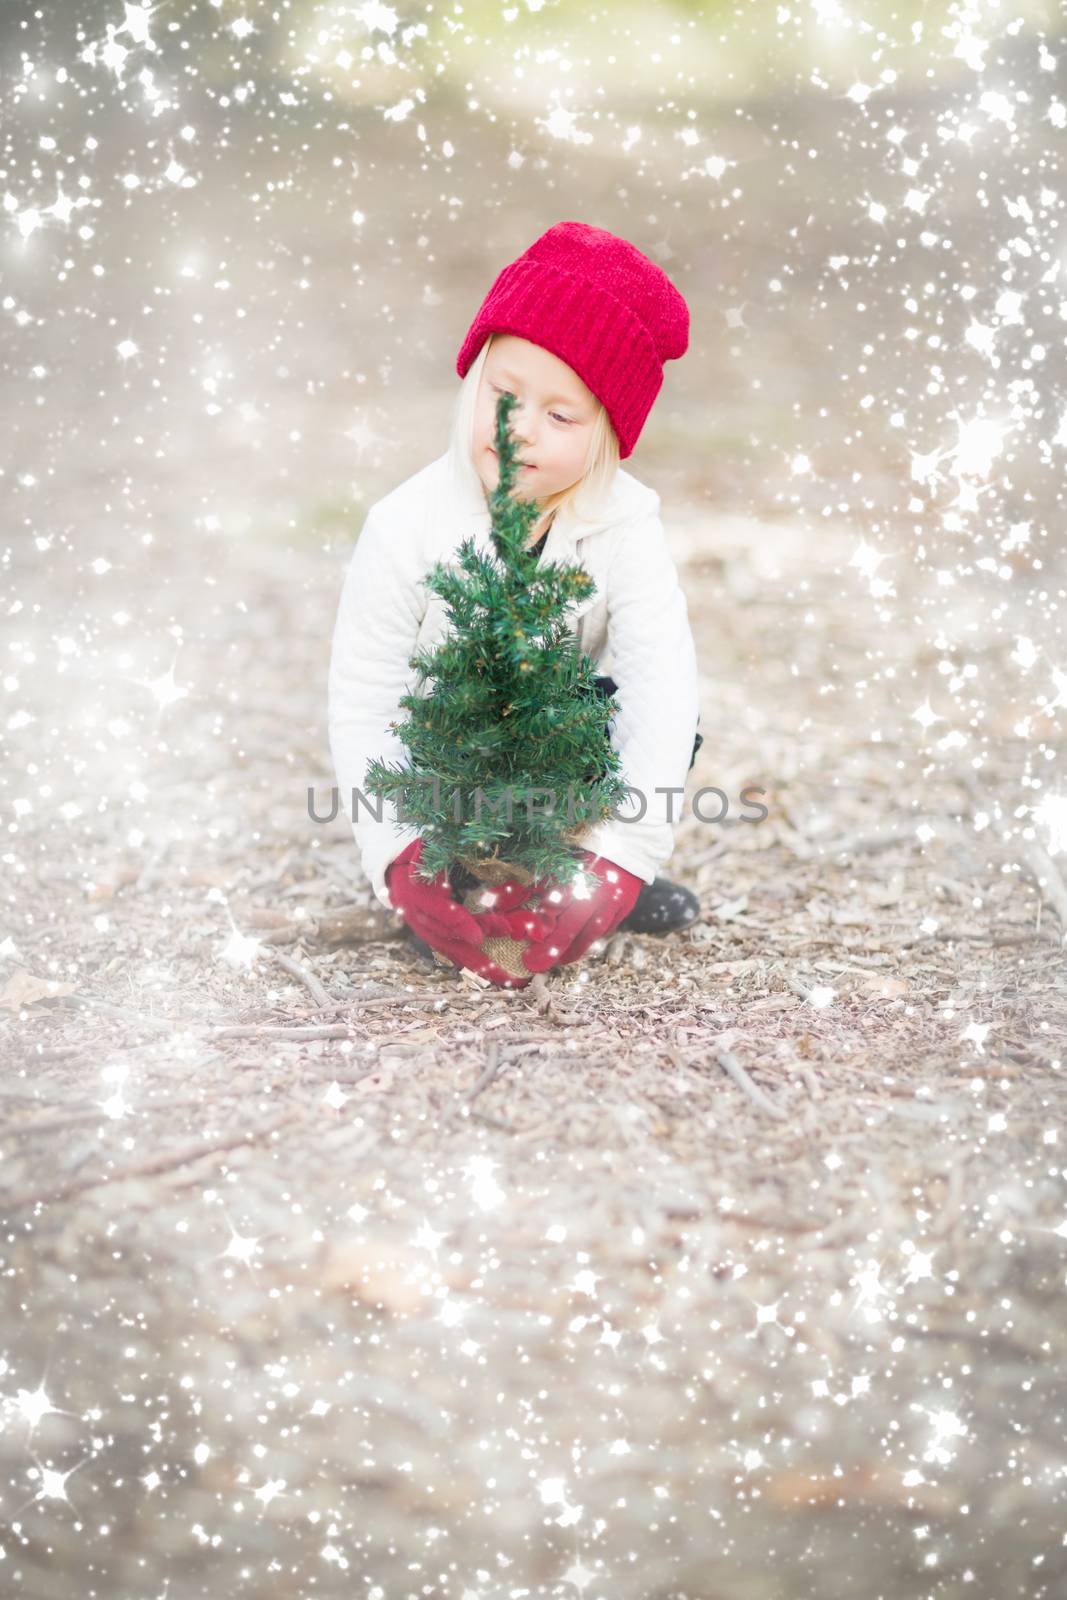 Baby Girl In Red Mittens and Cap Near Small Christmas Tree Outdoors with Snow Effect.